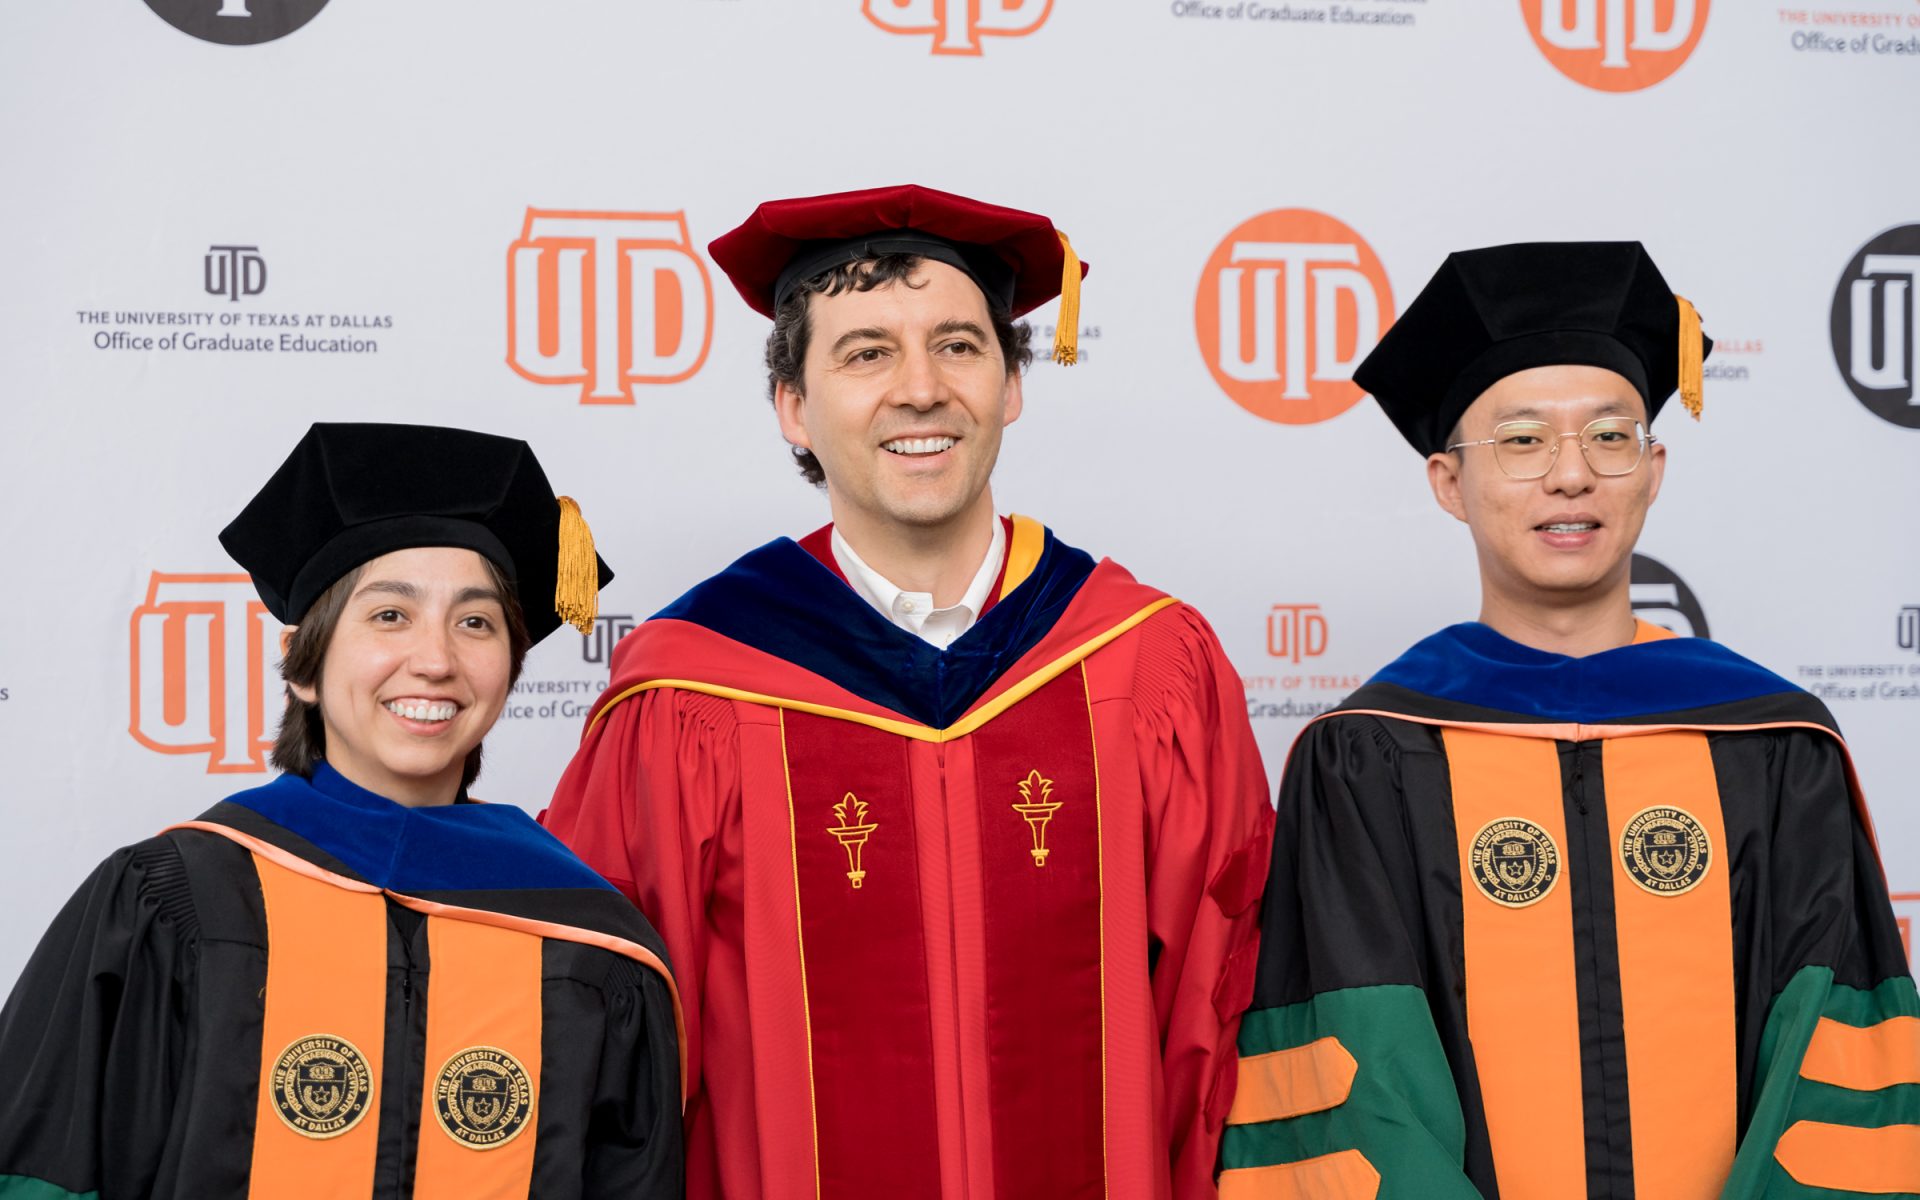 Go team! Andrea Vidal-Salazar PhD’23 (left) and Wei-Cheng Lin PhD’23 (right) joined Dr. Carlos Busso to celebrate at the Doctoral Hooding Ceremony on May 12. Busso’s group studies affective computing, human behavior and signal processing in the Department of Electrical and Computer Engineering.